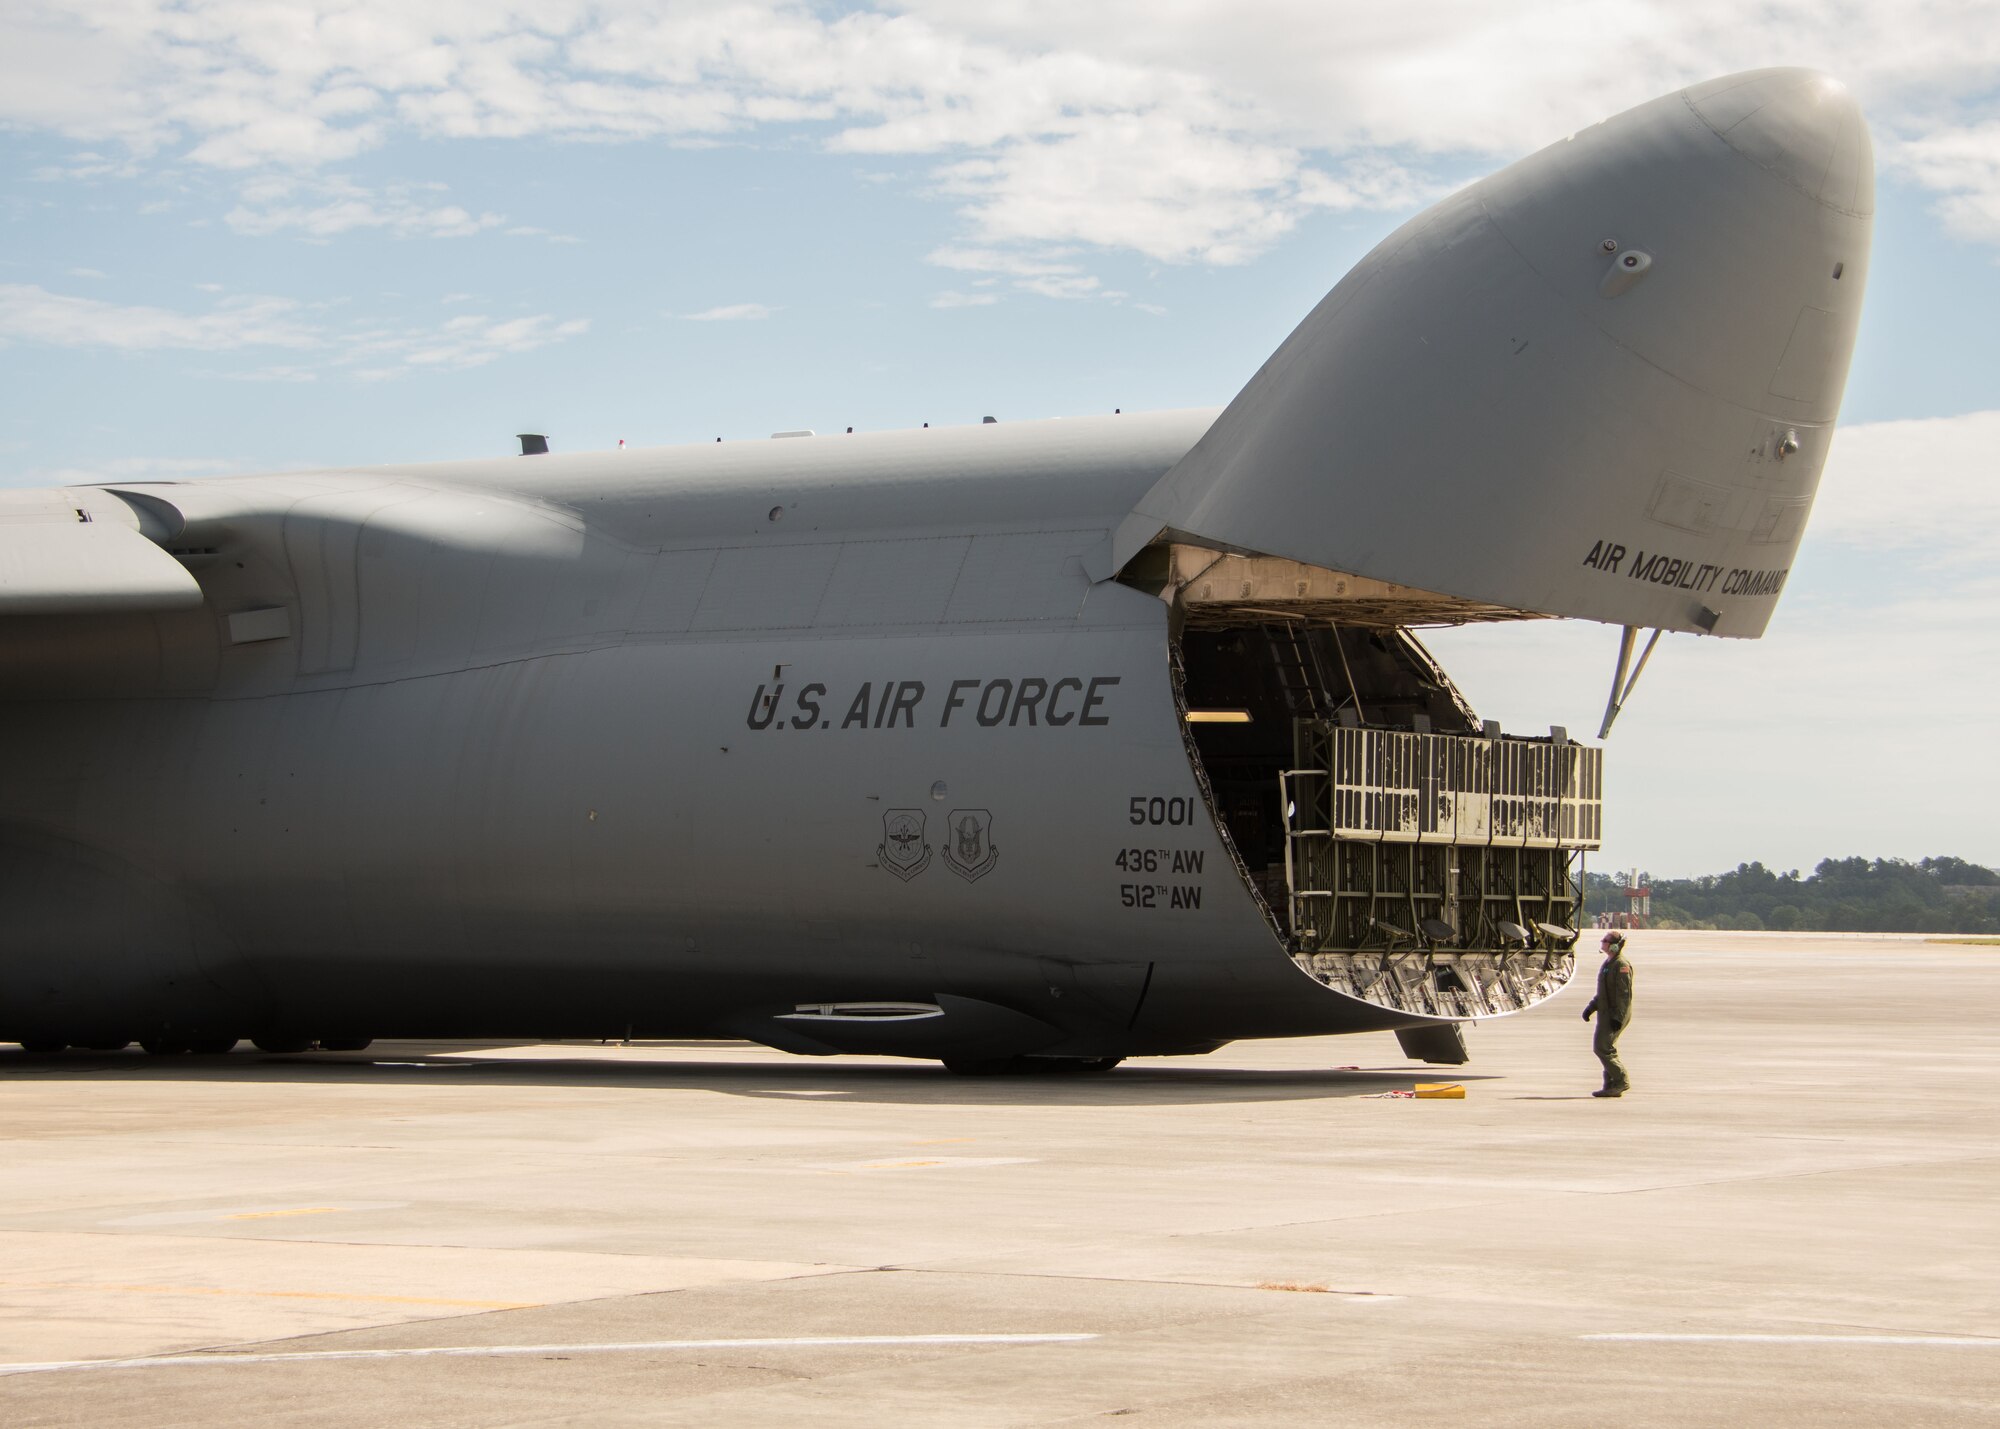 An aircrew member from Dover Air Force Base, Del. watches as a cargo bay door closes on a C-5M Super Galaxy at Dobbins Air Reserve Base, Ga. Oct. 2, 2017. The plane then departed to bring vital communication equipment to Puerto Rico, which was caught in the destructive path of Hurricane Maria. (U.S. Air Force photo/Staff Sgt. Andrew Park)